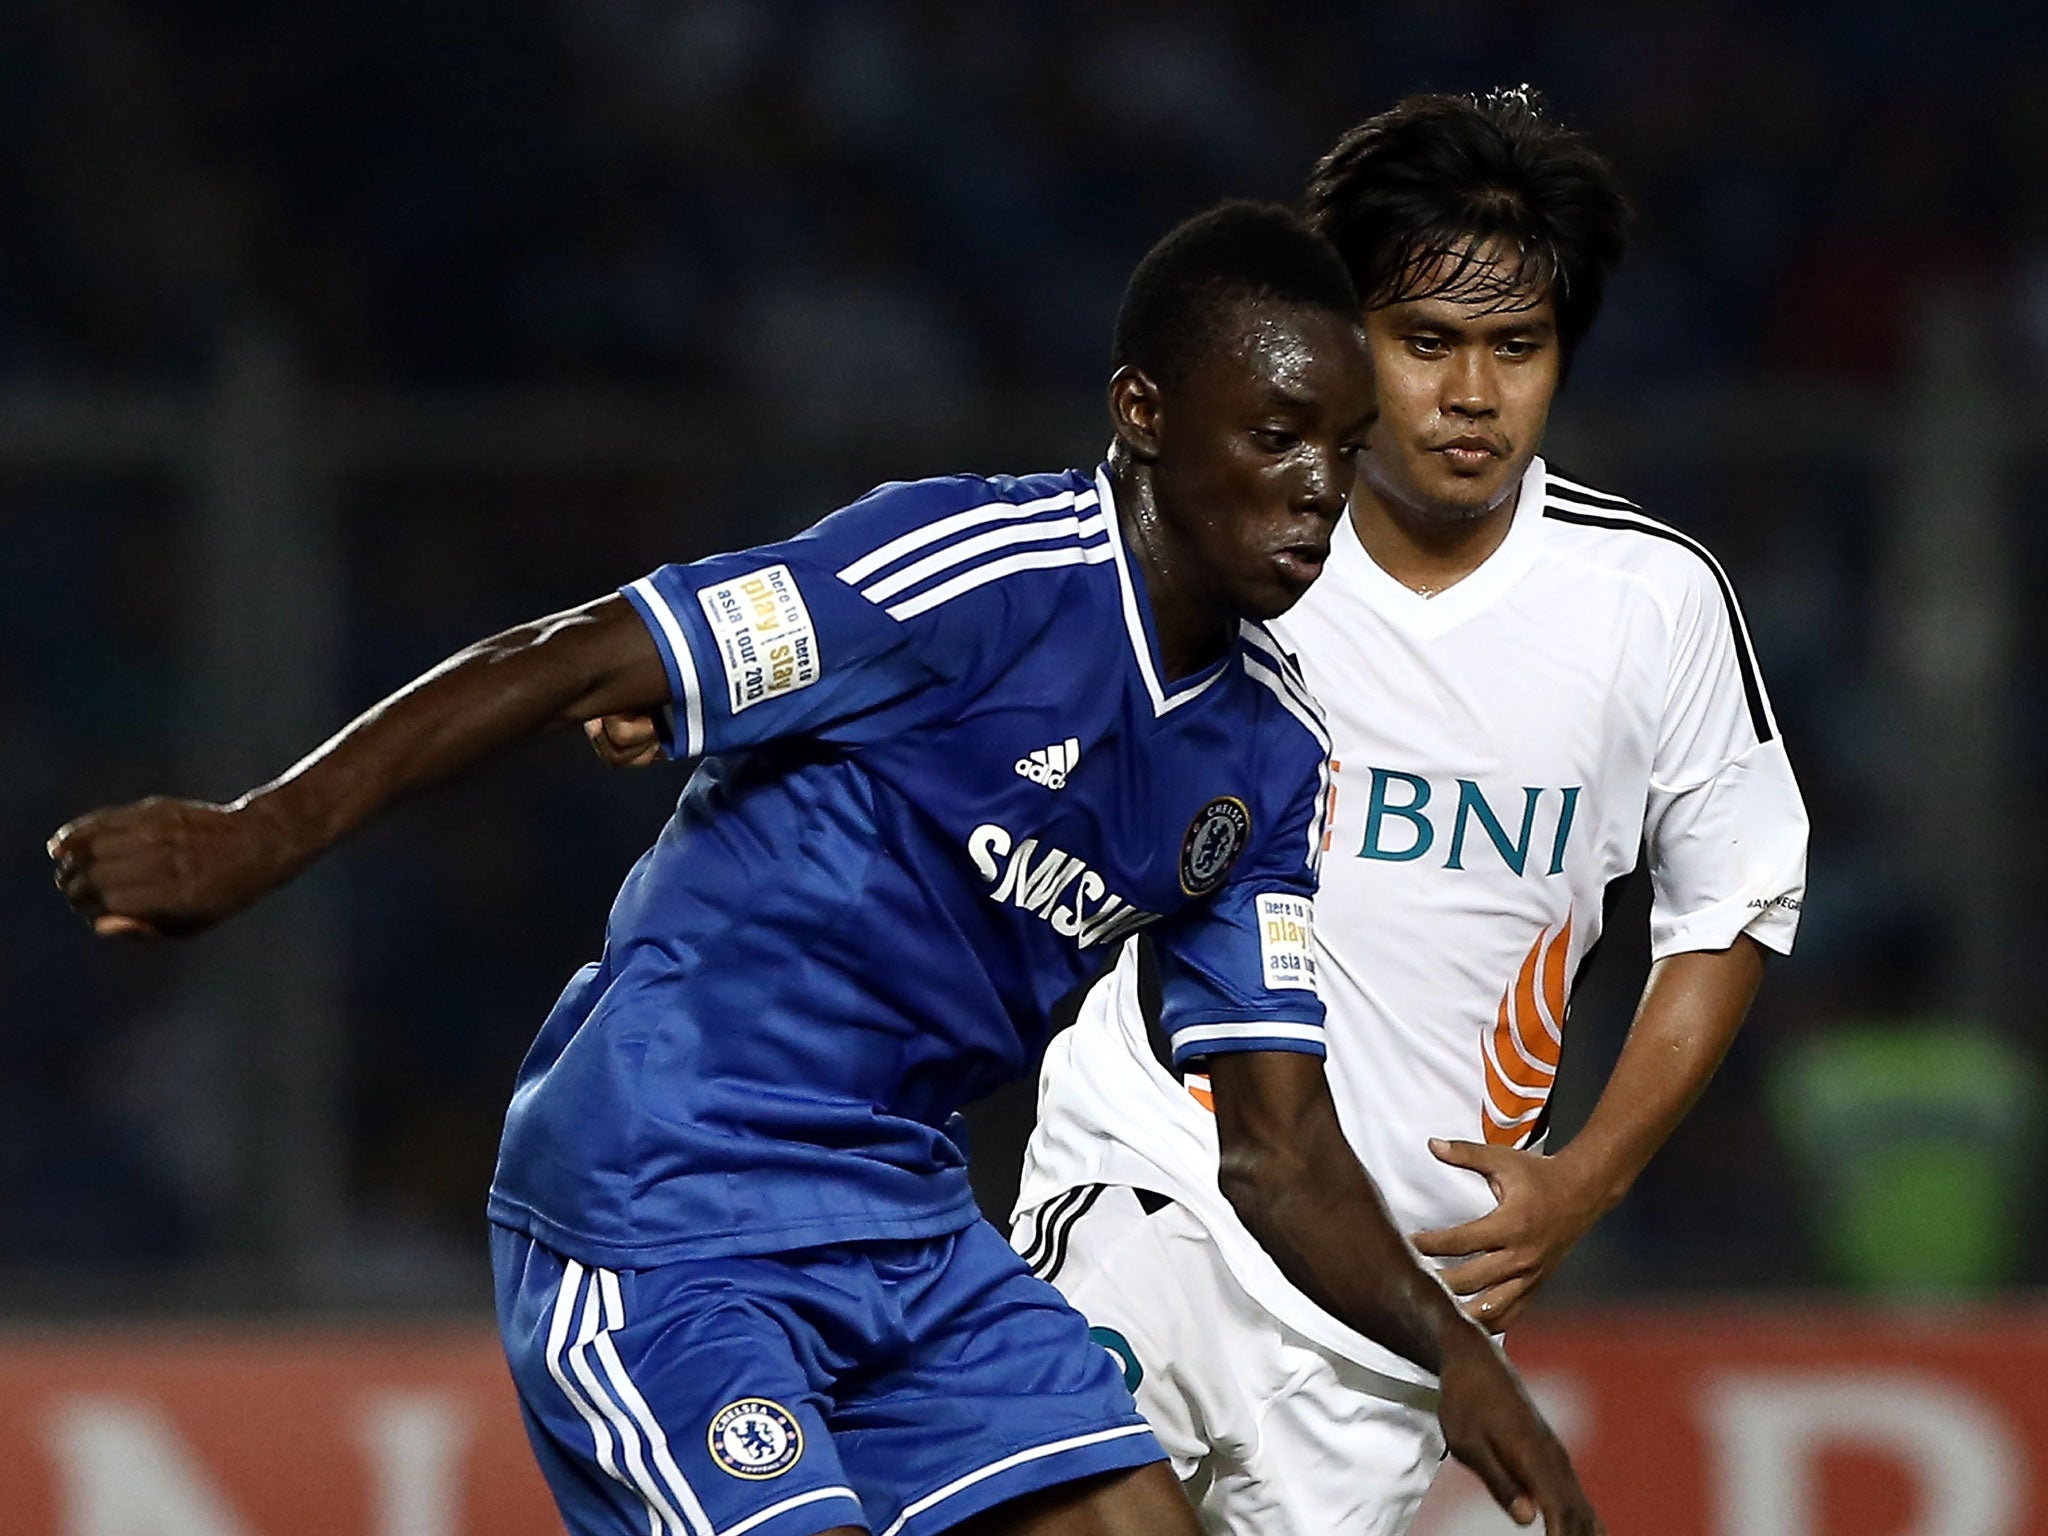 Bertrand Traore of Chelsea is pursued by Rizky Pellu of Indonesia All-Stars during the match between Chelsea and Indonesia All-Stars at Gelora Bung Karno Stadium on July 25